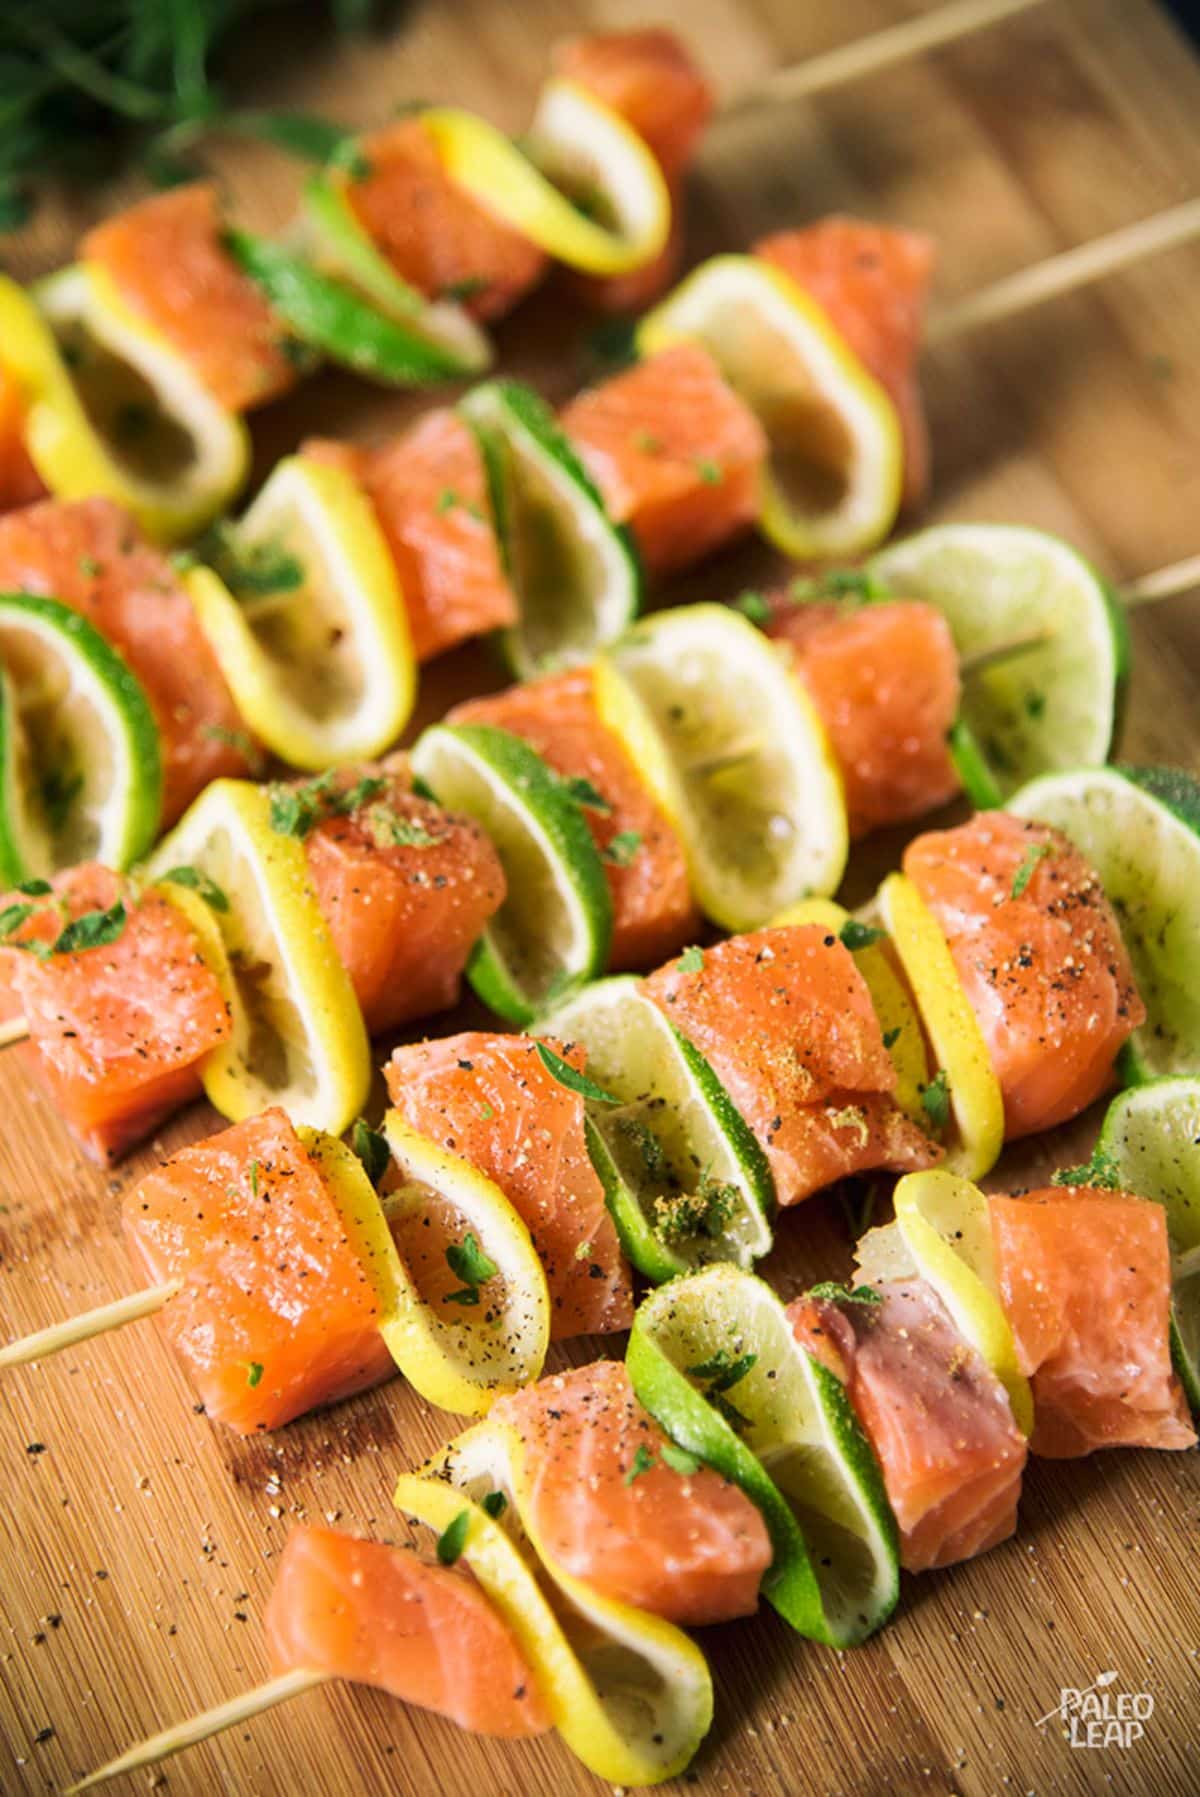 Grilled Salmon Lemon And Lime Skewers Recipe Preparation